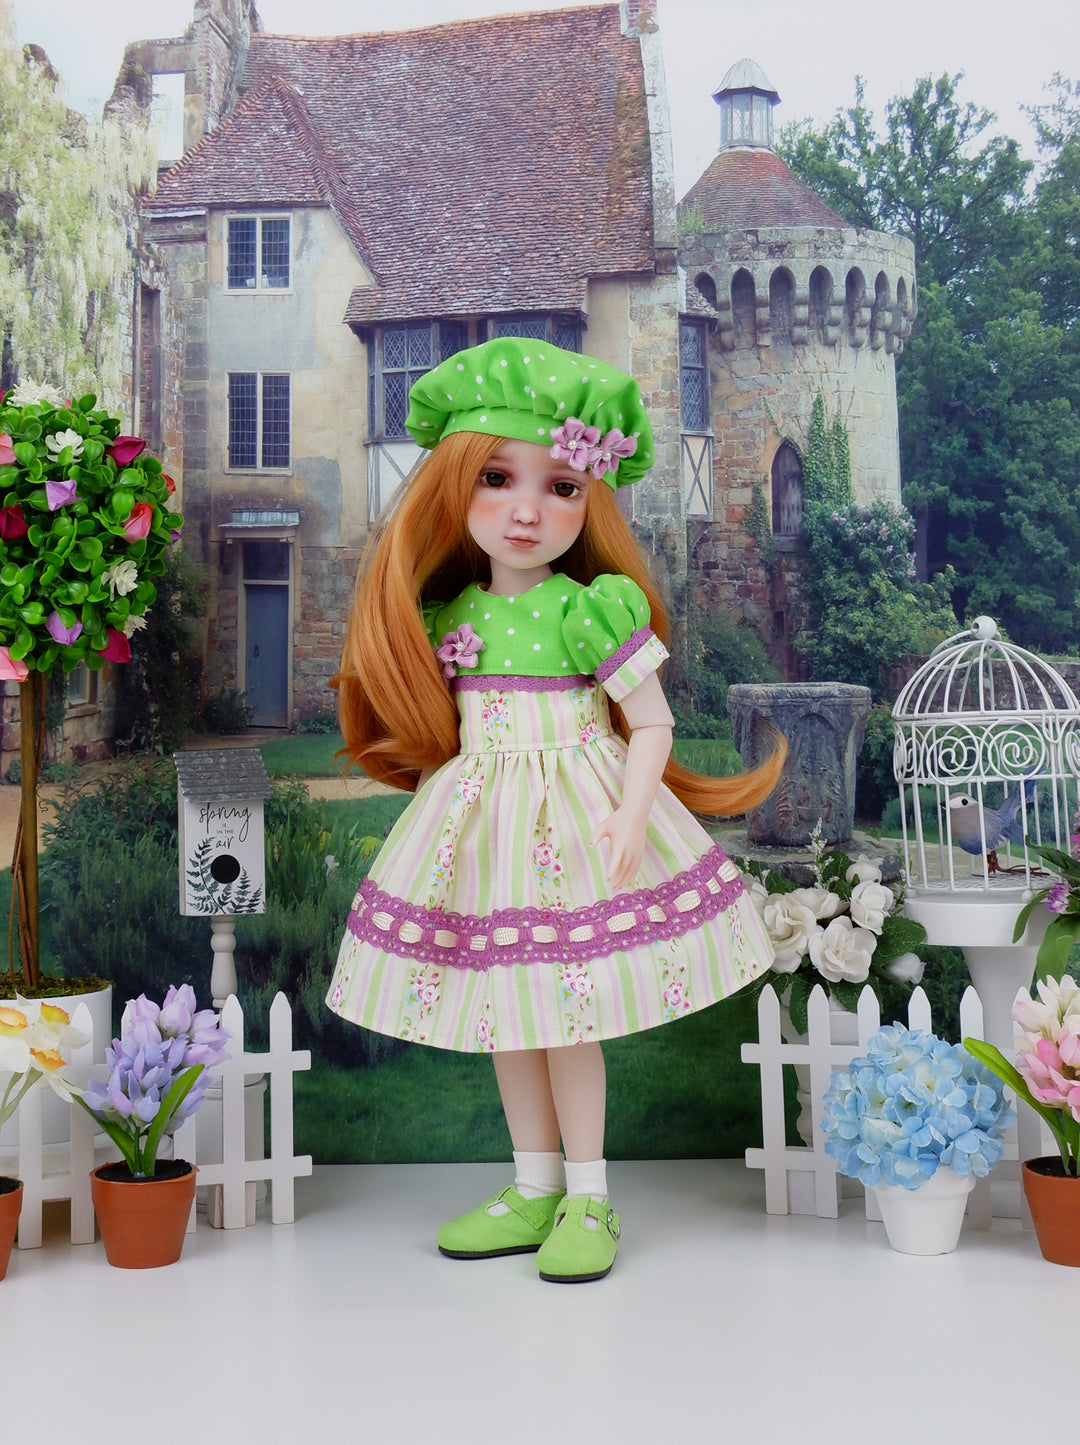 May Flowers - dress and shoes for Ruby Red Fashion Friends doll